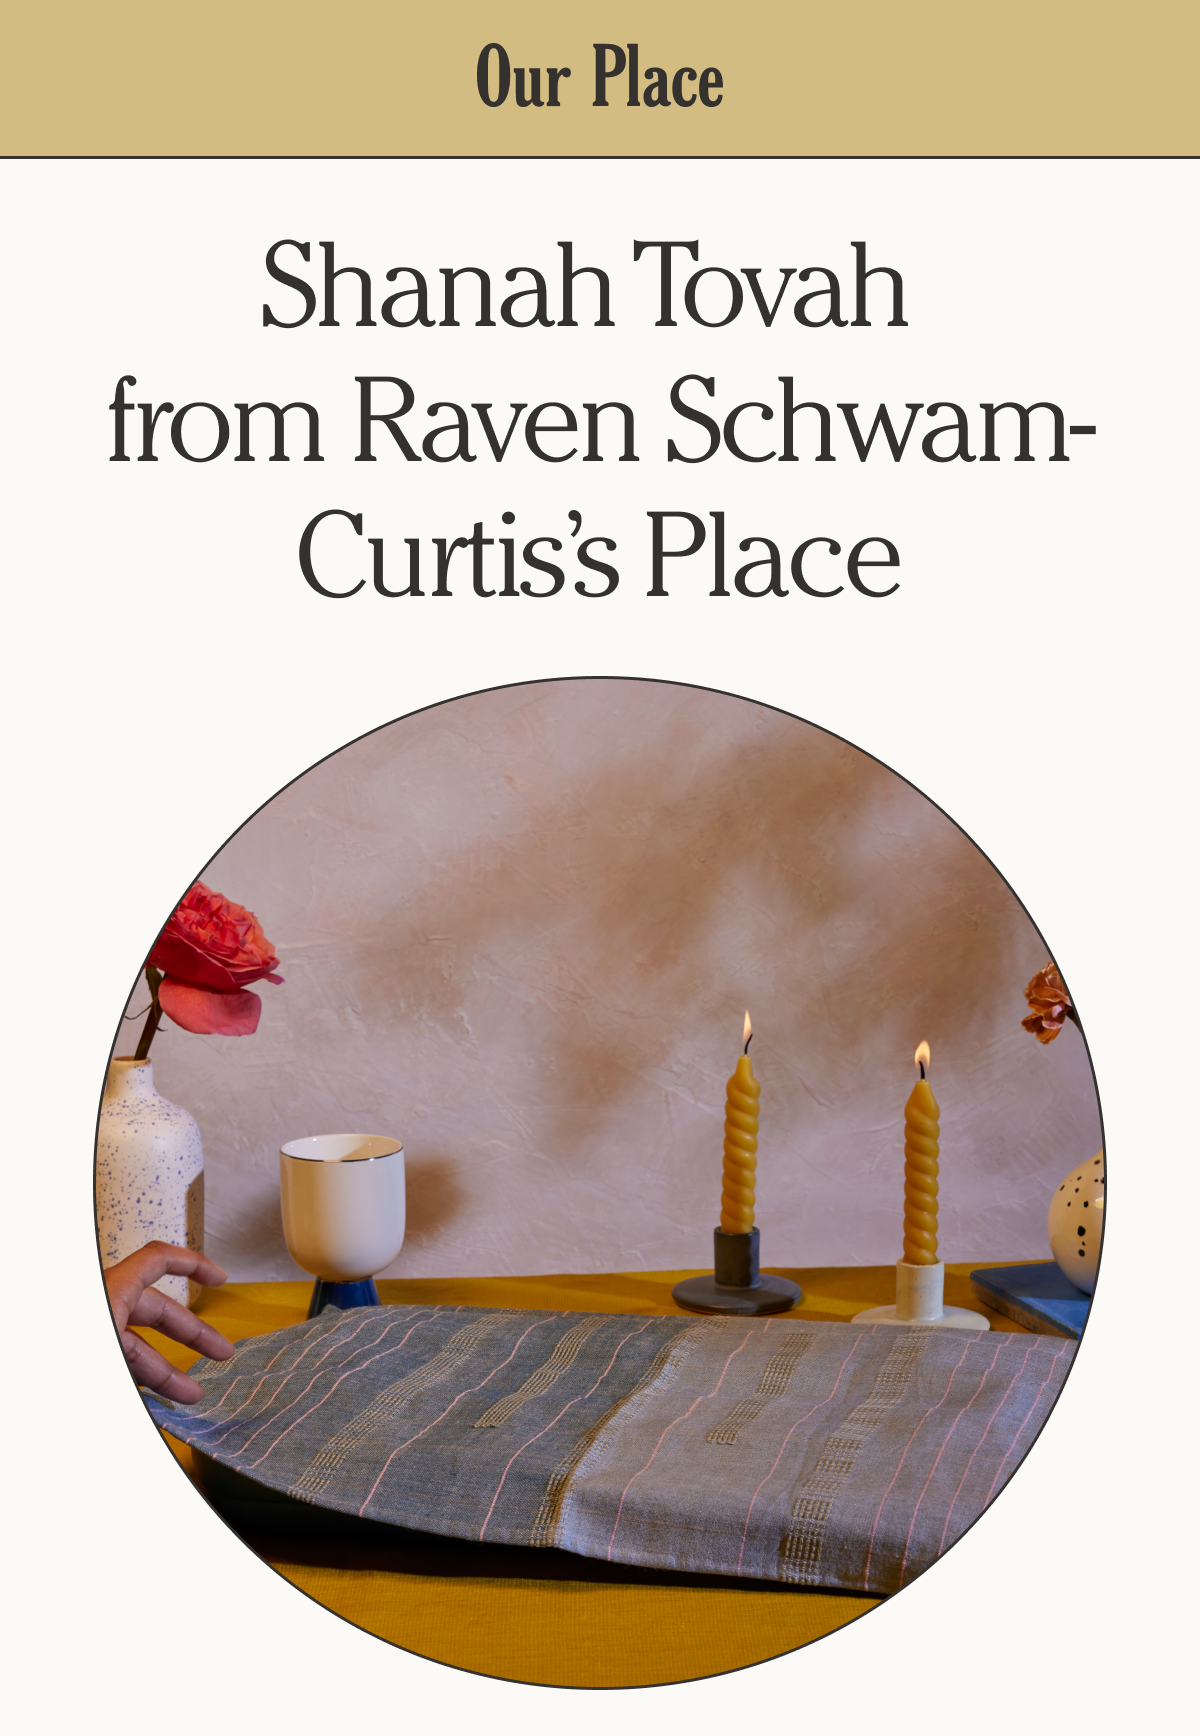 Our Place - Shanah Tovah from Raven Schwam-Curtis’s Place